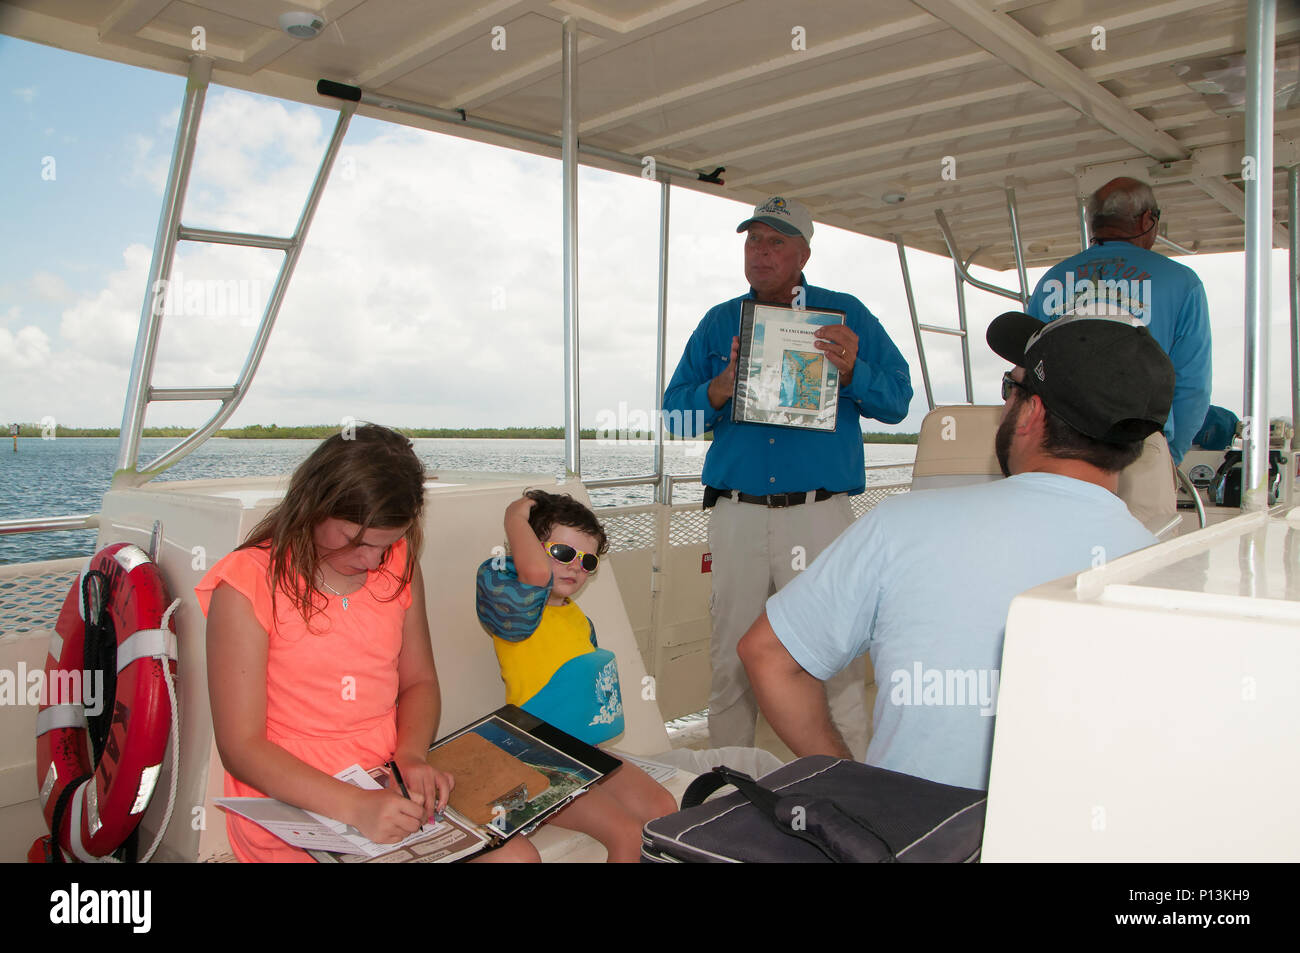 The Dolphin Explorer offers guests an opportunity to participate in dolphin research and data collection on a survey project in the 10,000 Islands. Stock Photo